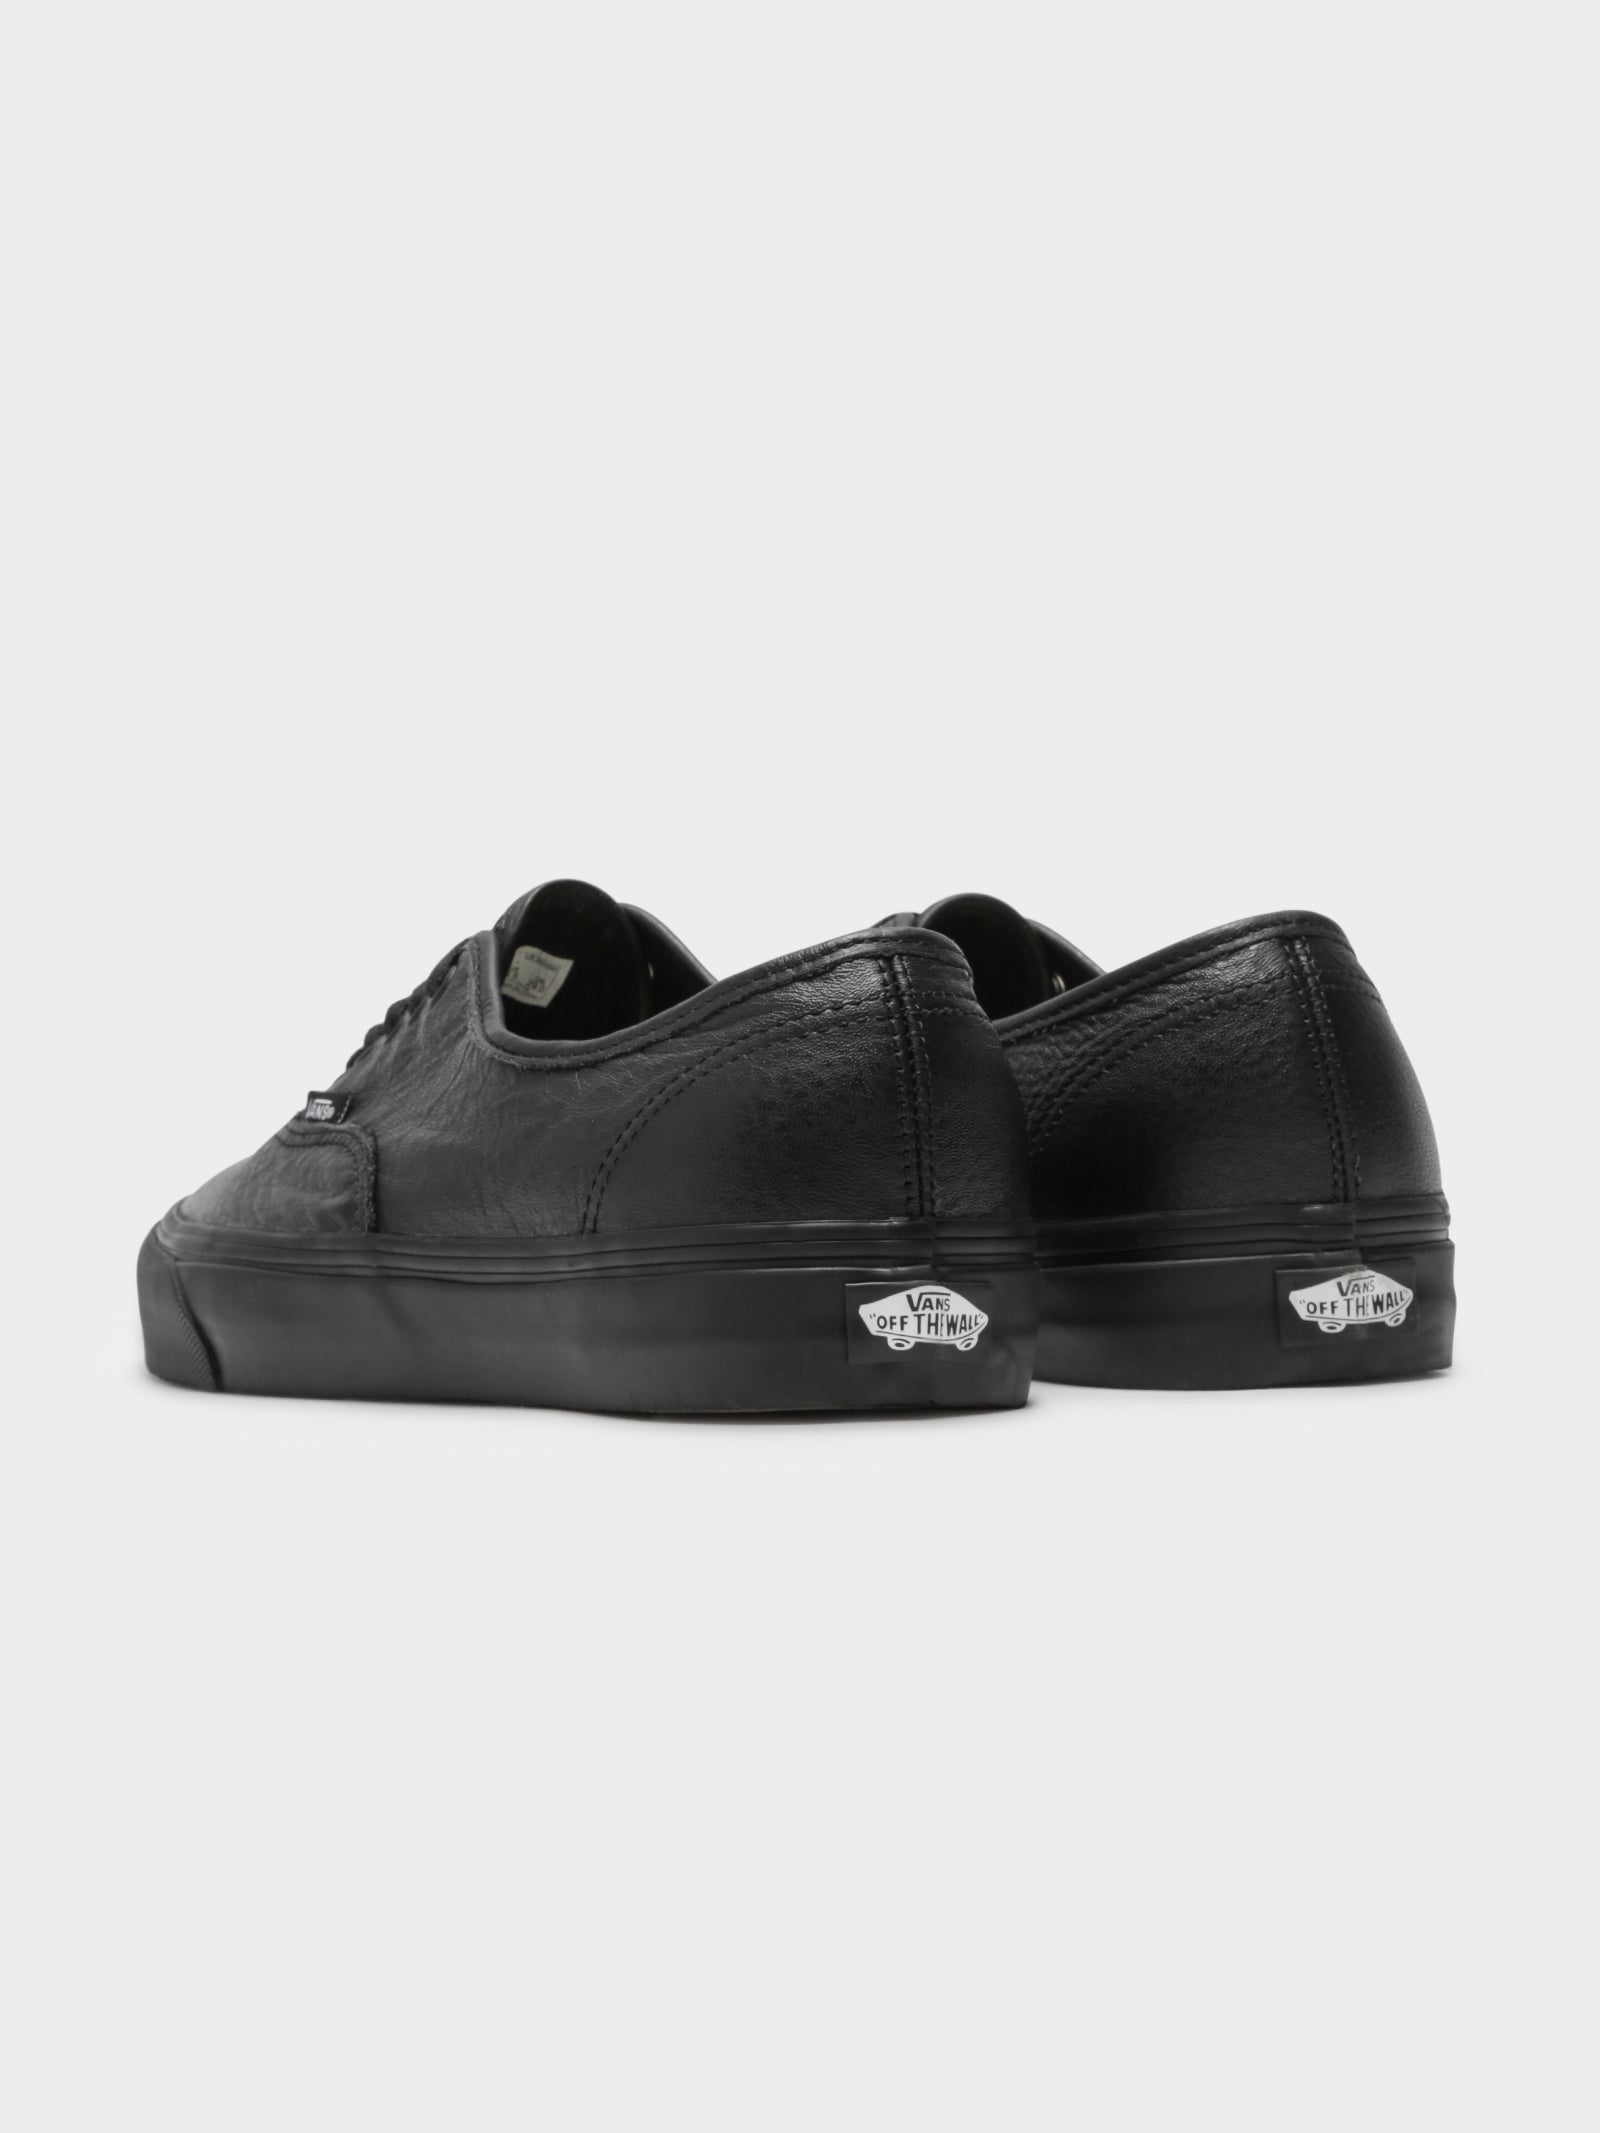 Unisex Authentic Leather Sneakers in Black - Glue Store